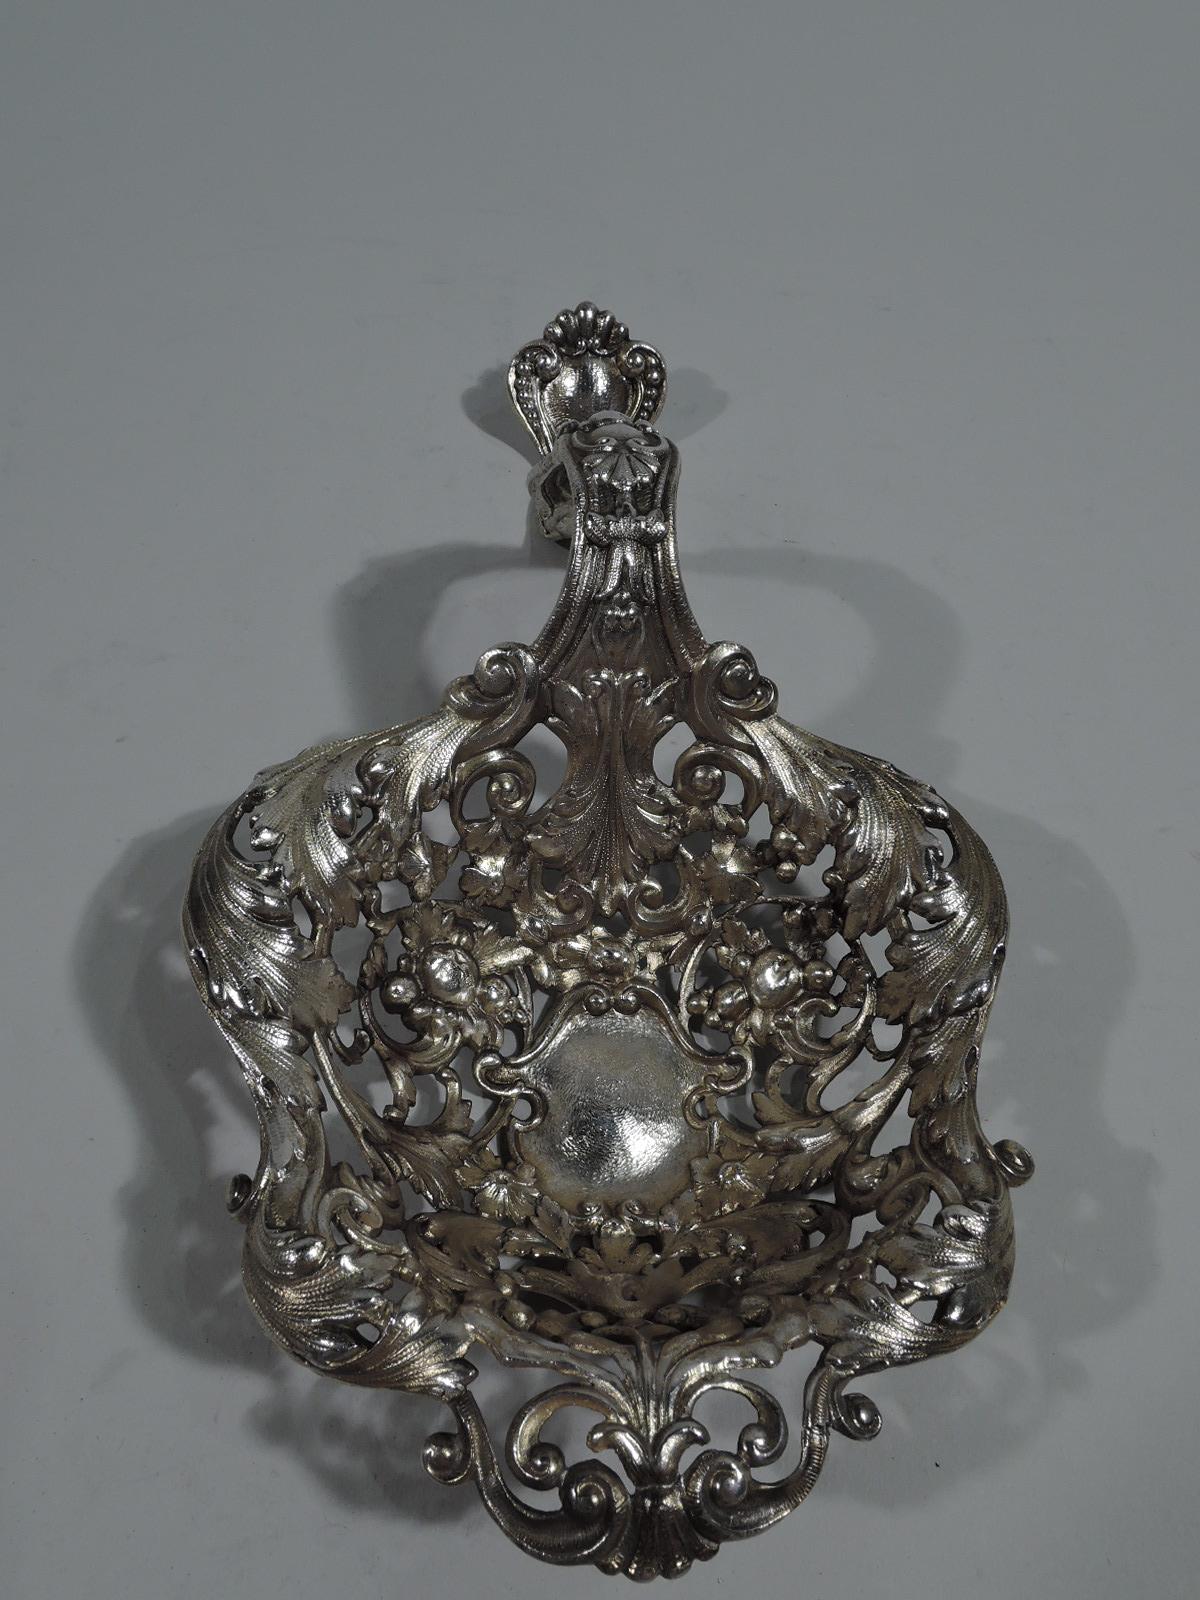 Large and heavy turn-of-the-century sterling silver bonbon scoop. Made by Gorham in Providence. Deep and shaped bowl with central strapwork cartouche surrounded by leaves and flowers. S-scroll handle with shell and scroll terminal. Lightly gilt